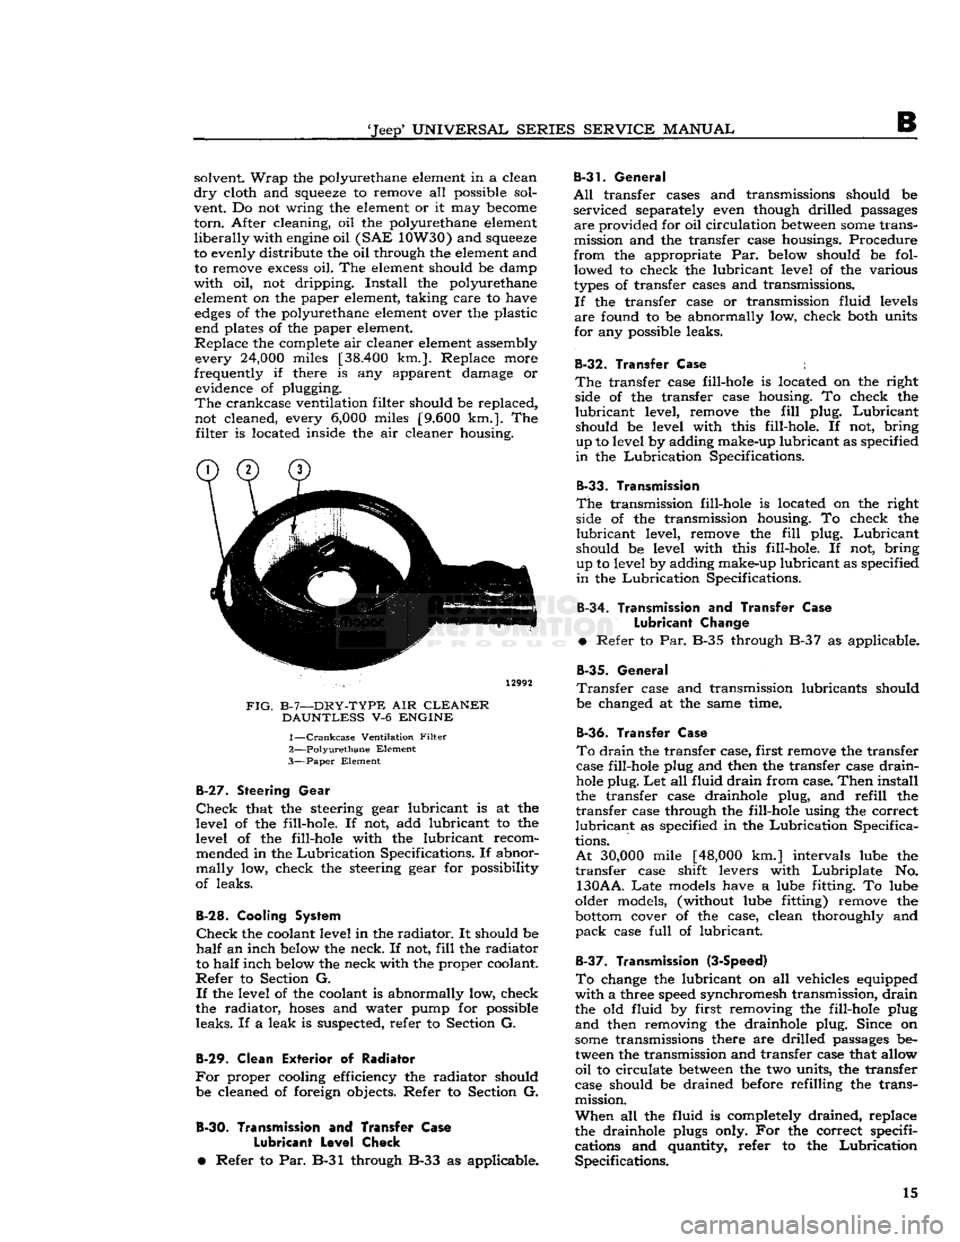 JEEP CJ 1953 User Guide 
Jeep*
 UNIVERSAL SERIES SERVICE
 MANUAL 

B 
solvent.
 Wrap
 the polyurethane element in a clean 

dry
 cloth and
 squeeze
 to remove all possible sol­
vent. Do not wring the element or it may
 bec